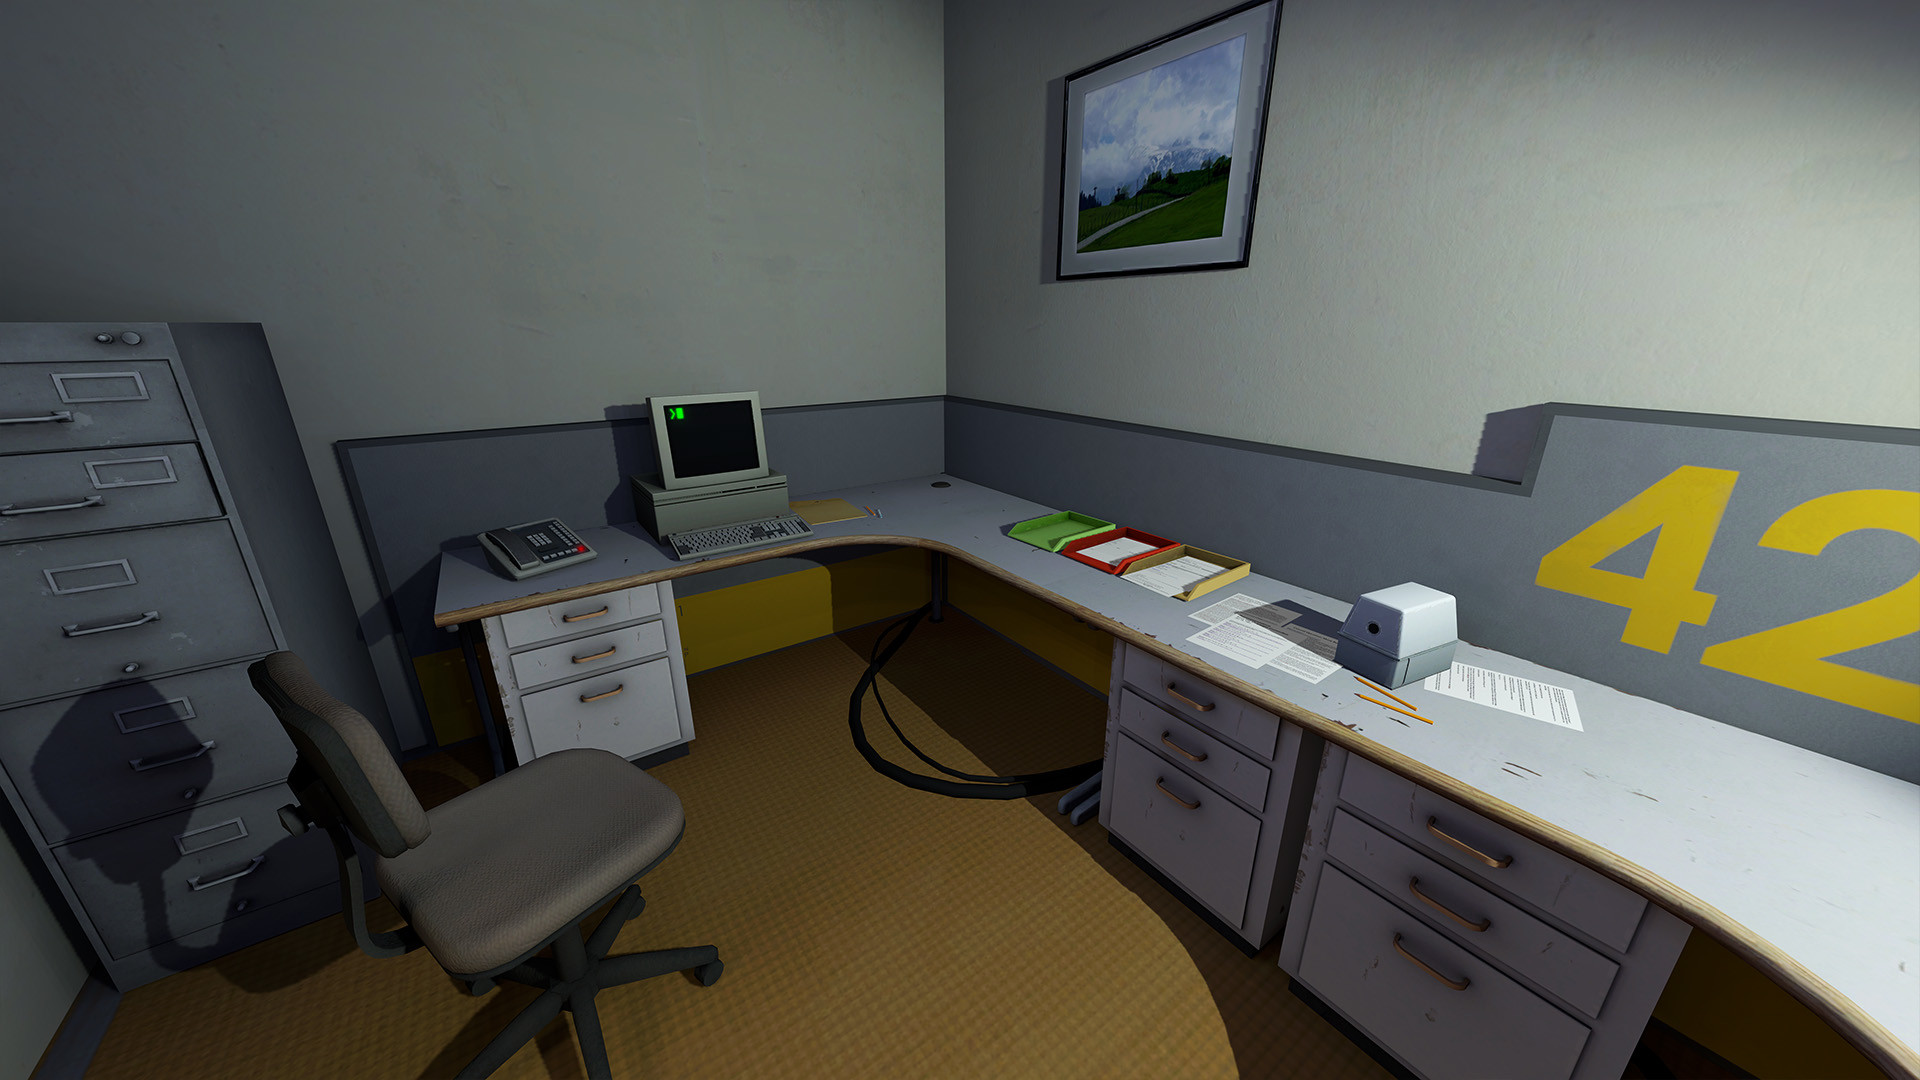 The Stanley Parable: Ultra Deluxe AR XBOX One CD Key